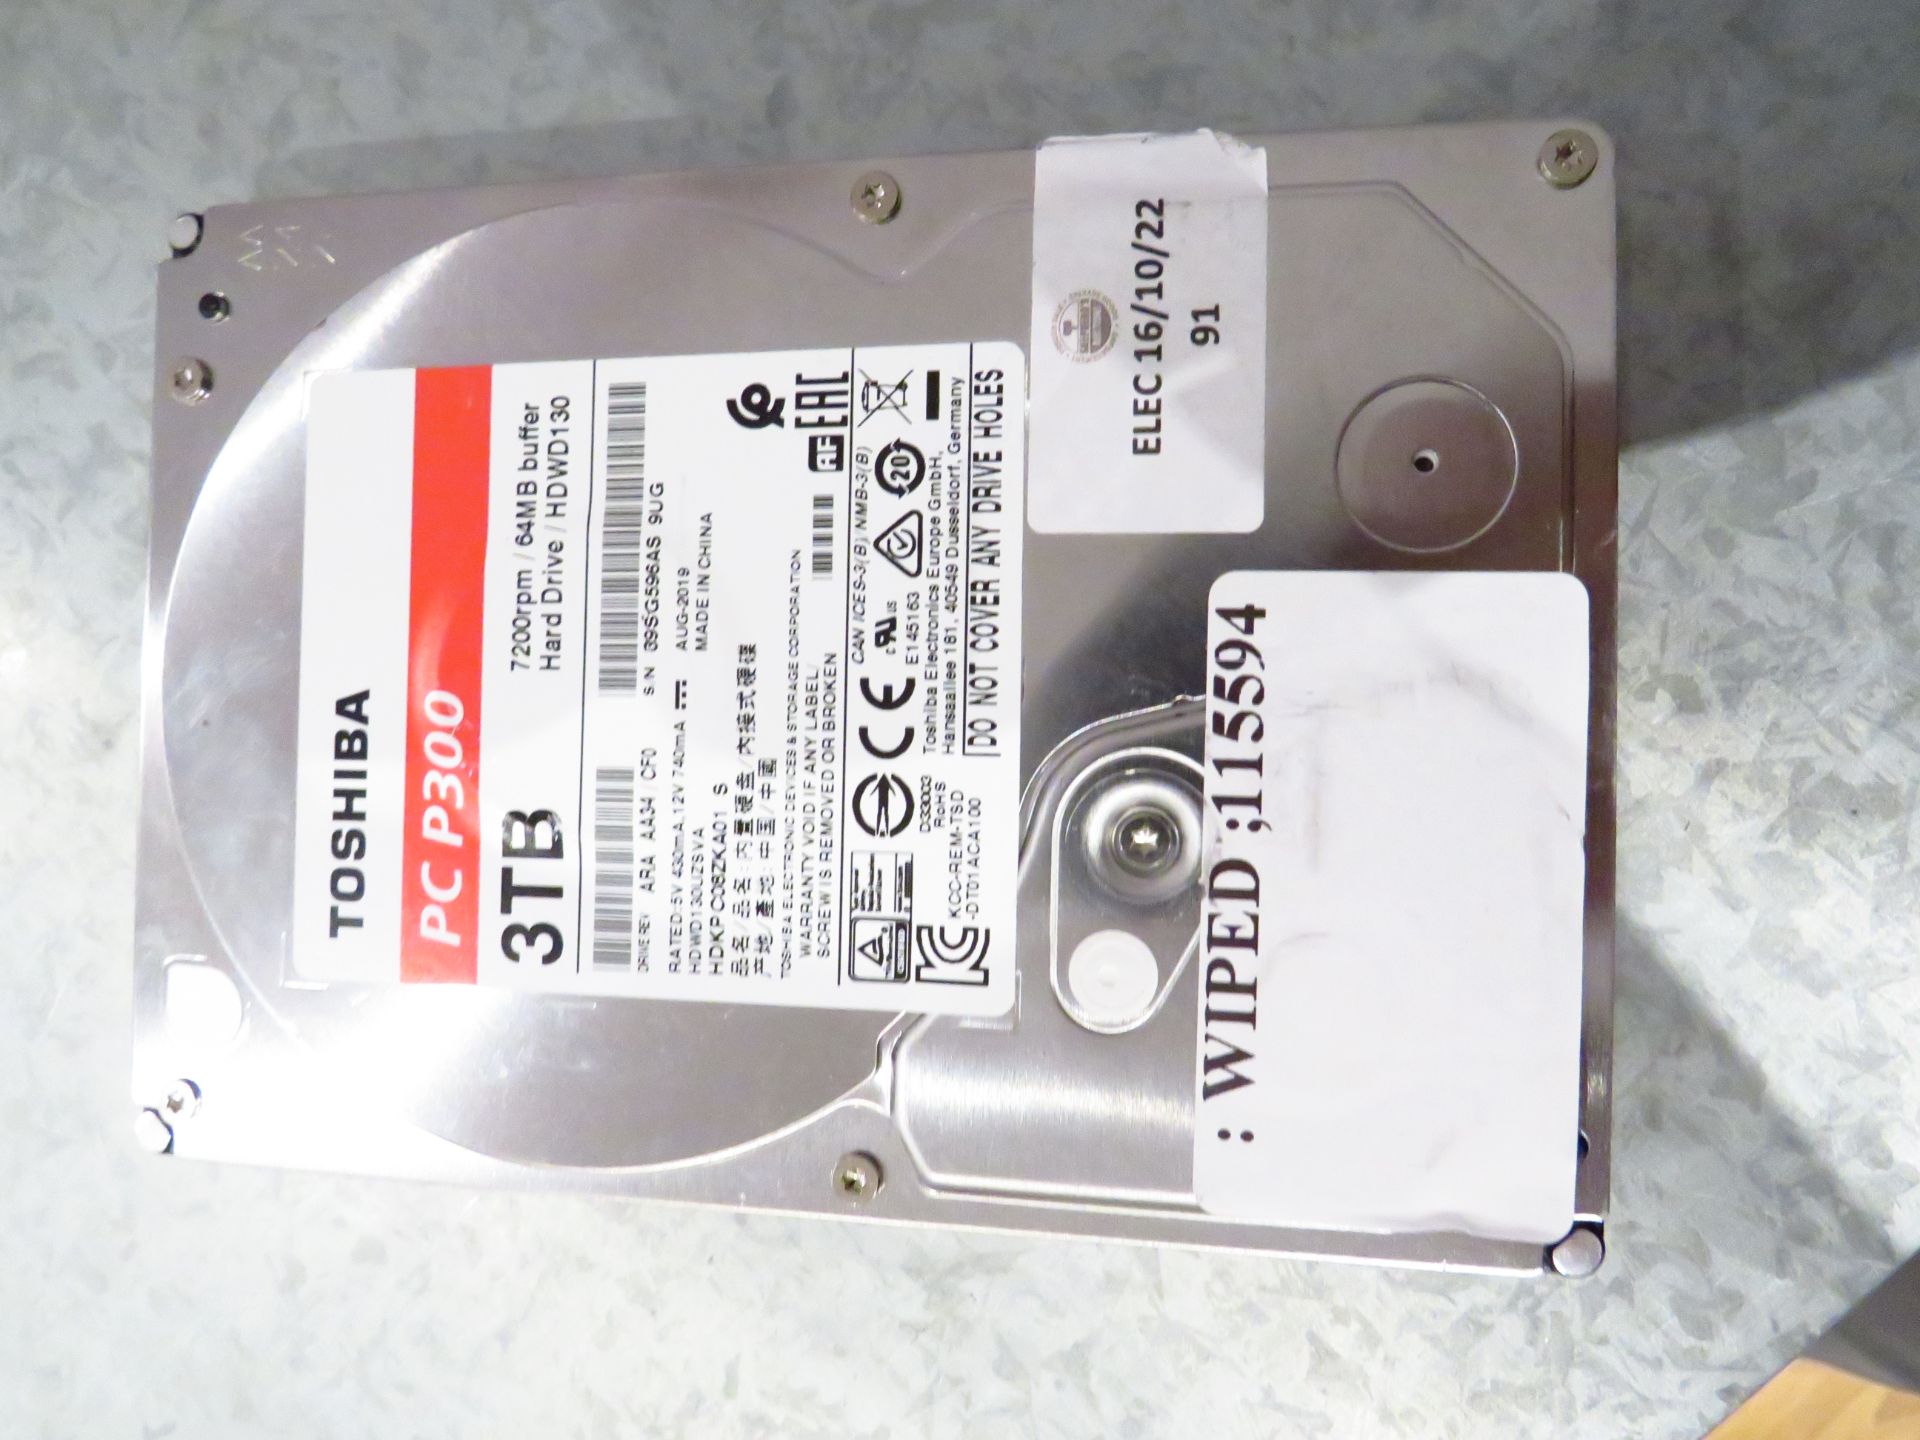 Toshiba PC P300 3TB hard drive, unchecked but has been professionally wiped